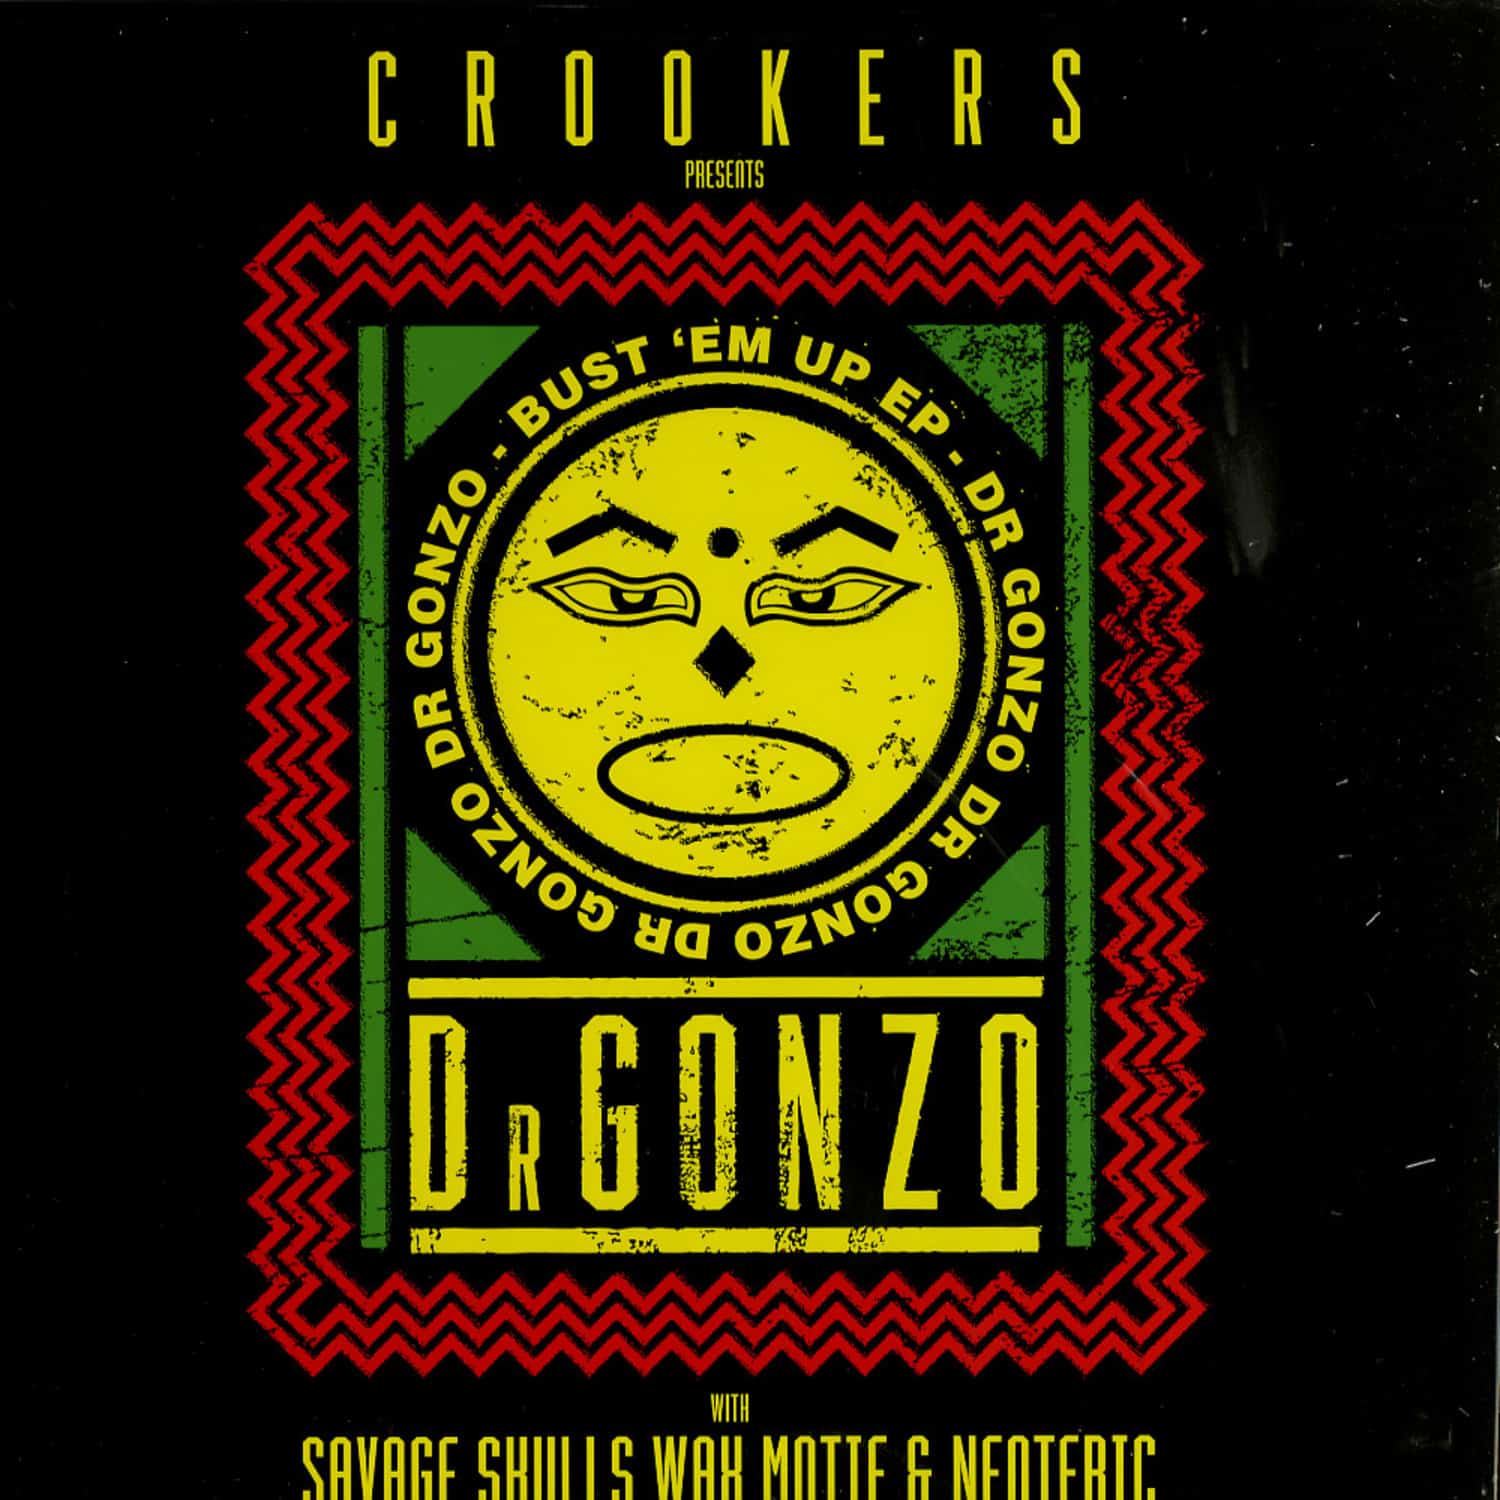 Crookers Presents Dr. Gonzo - BUSTEM UP EP